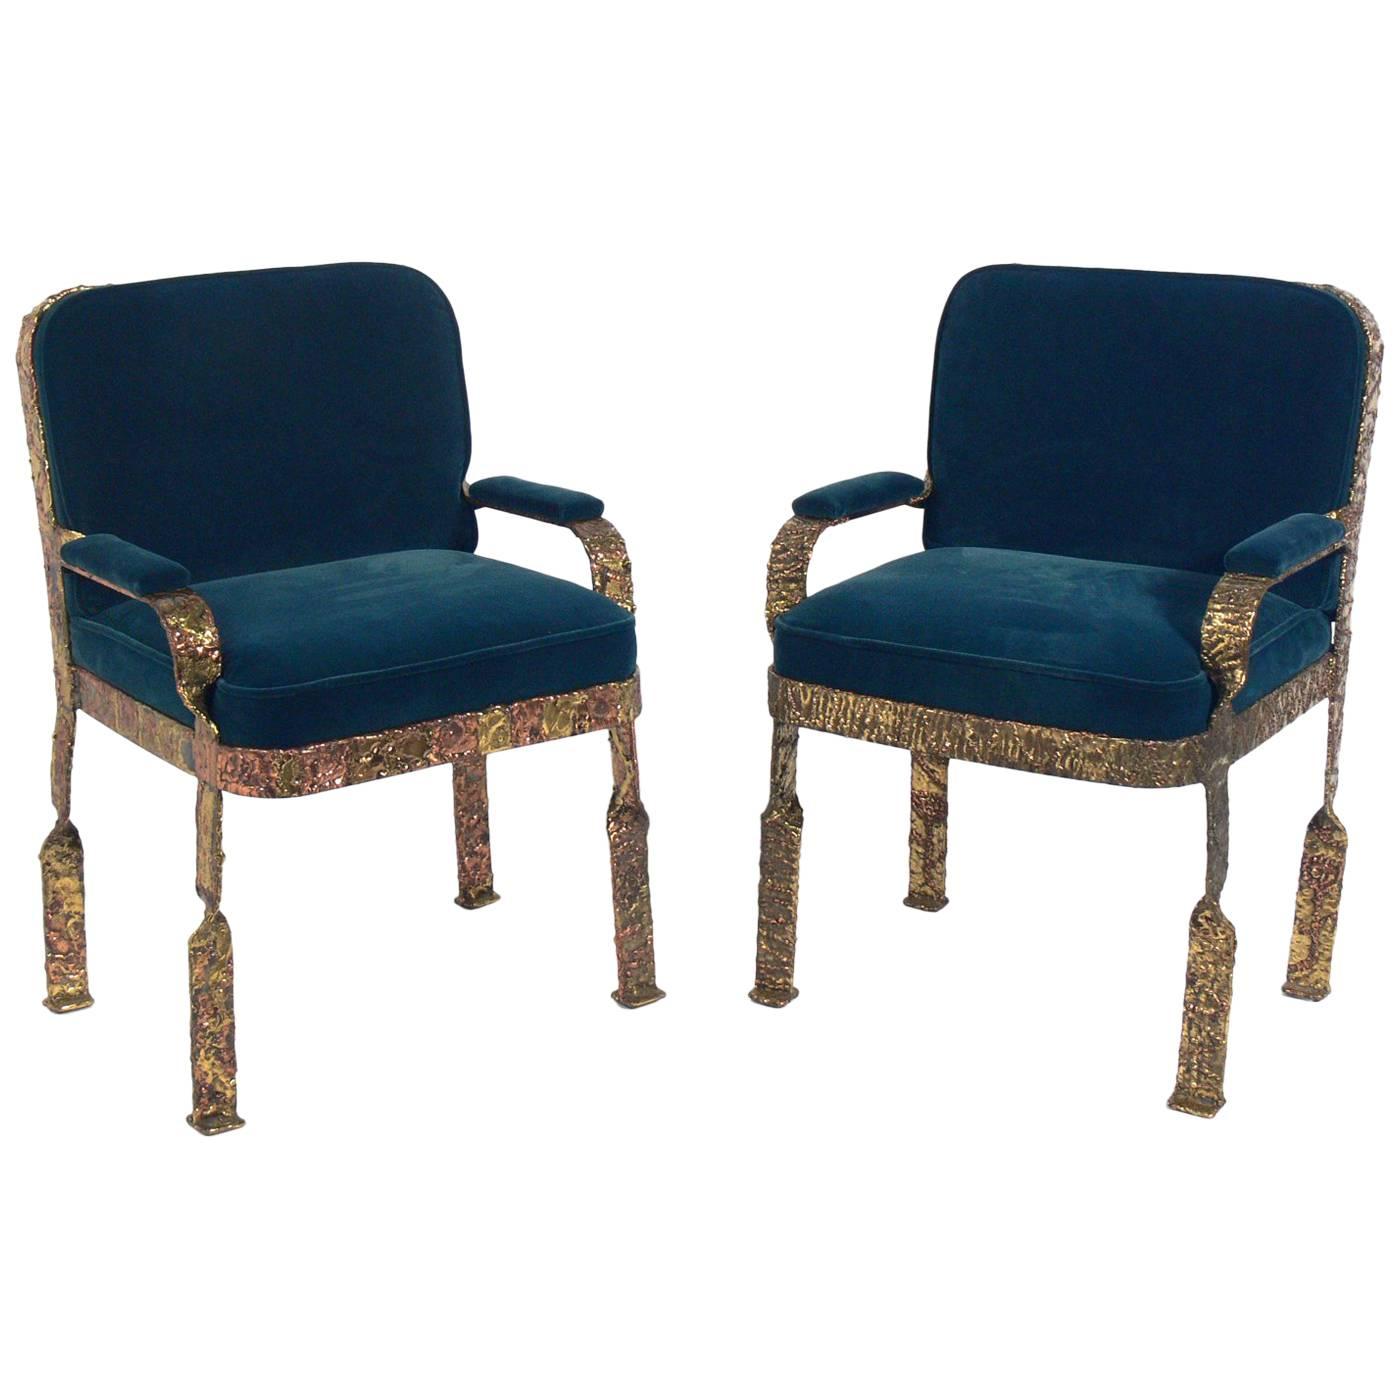 Pair of Sculptural Lounge Chairs Attributed to Silas Seandel